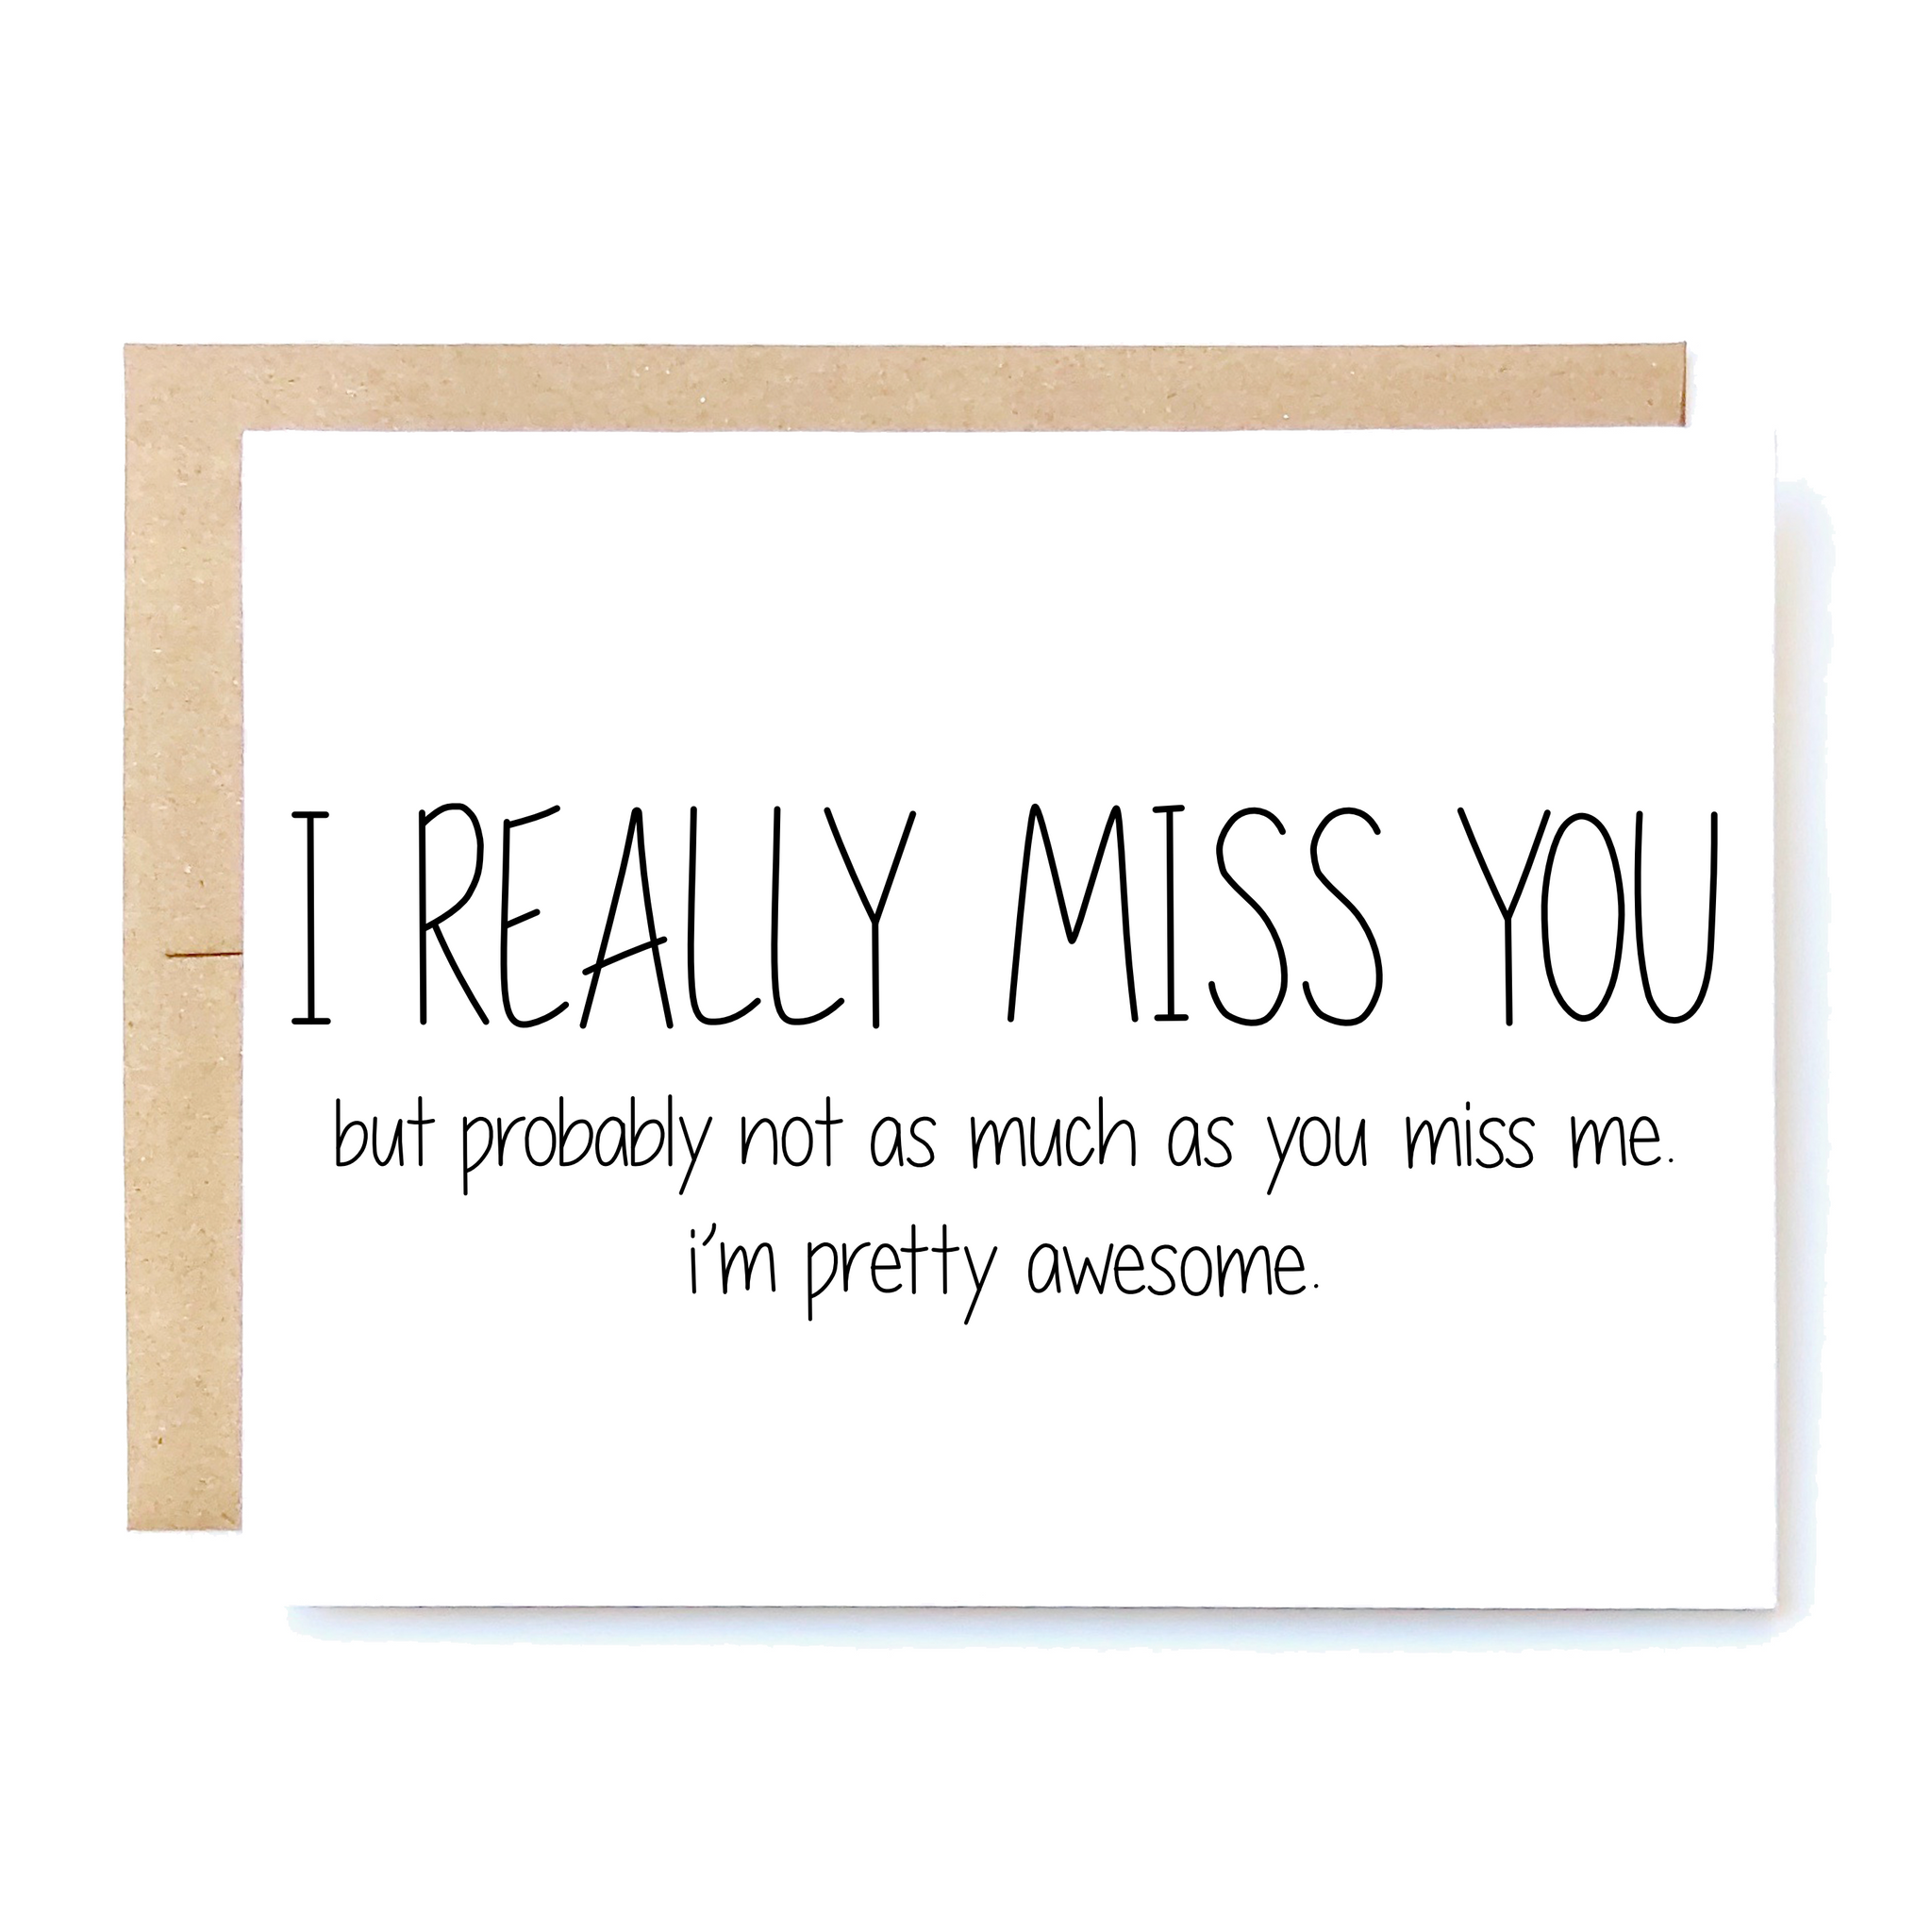 Card Front: I really miss you. But probably not as much as you miss me. I'm pretty awesome.